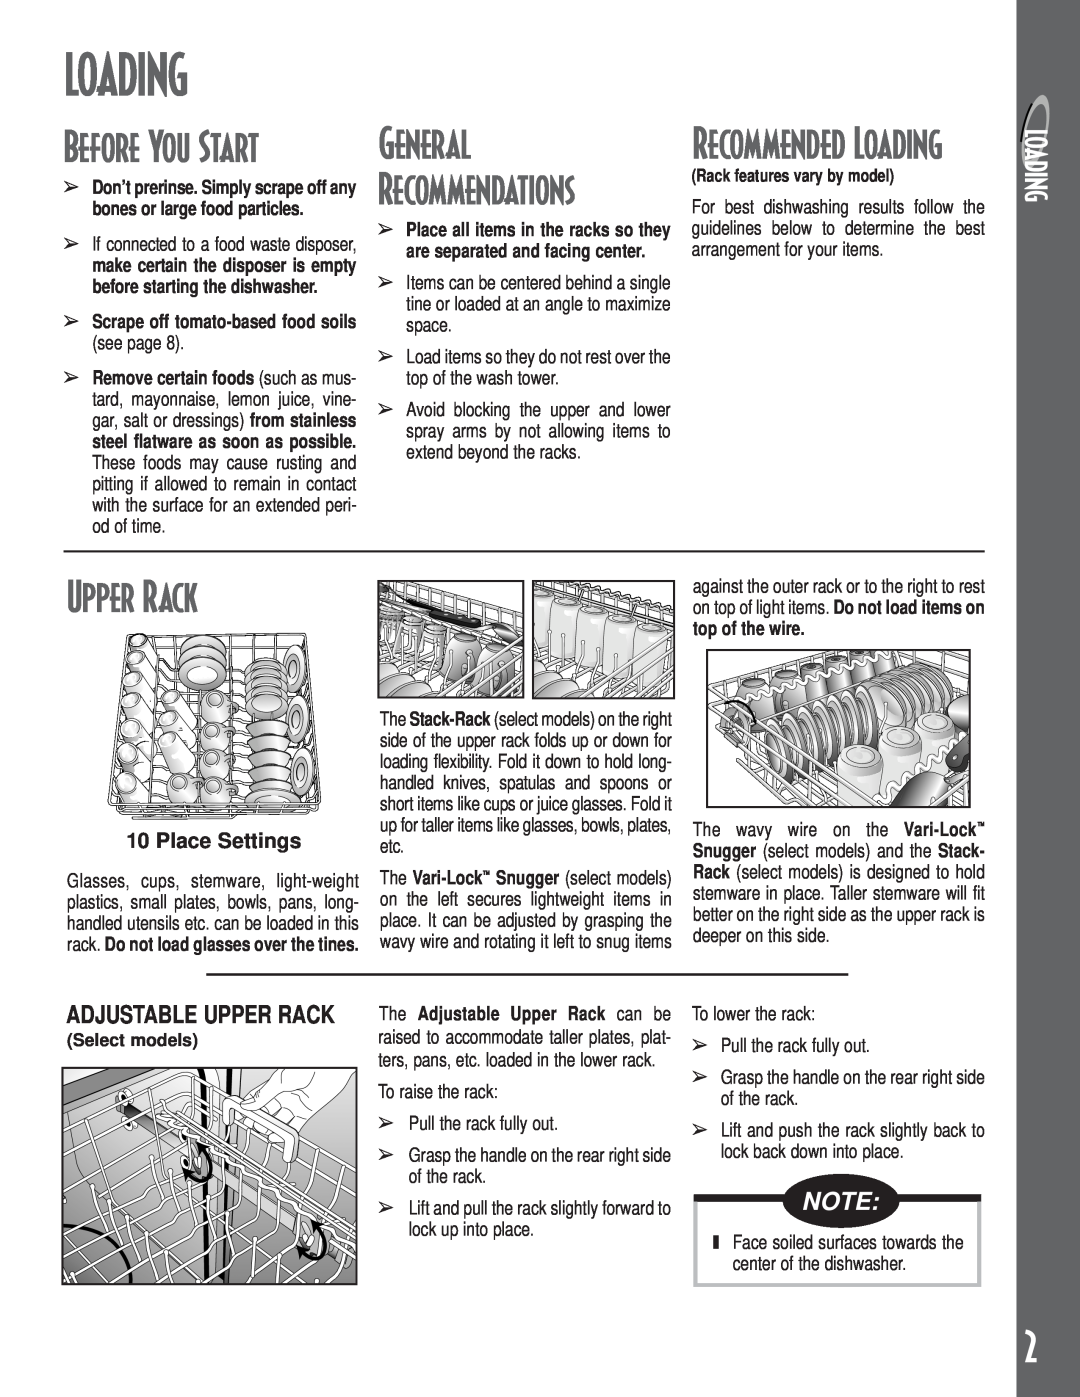 Maytag MDB/C-2 manual Before You Start, General, Recommendations, Recommended Loading, Adjustable Upper Rack 